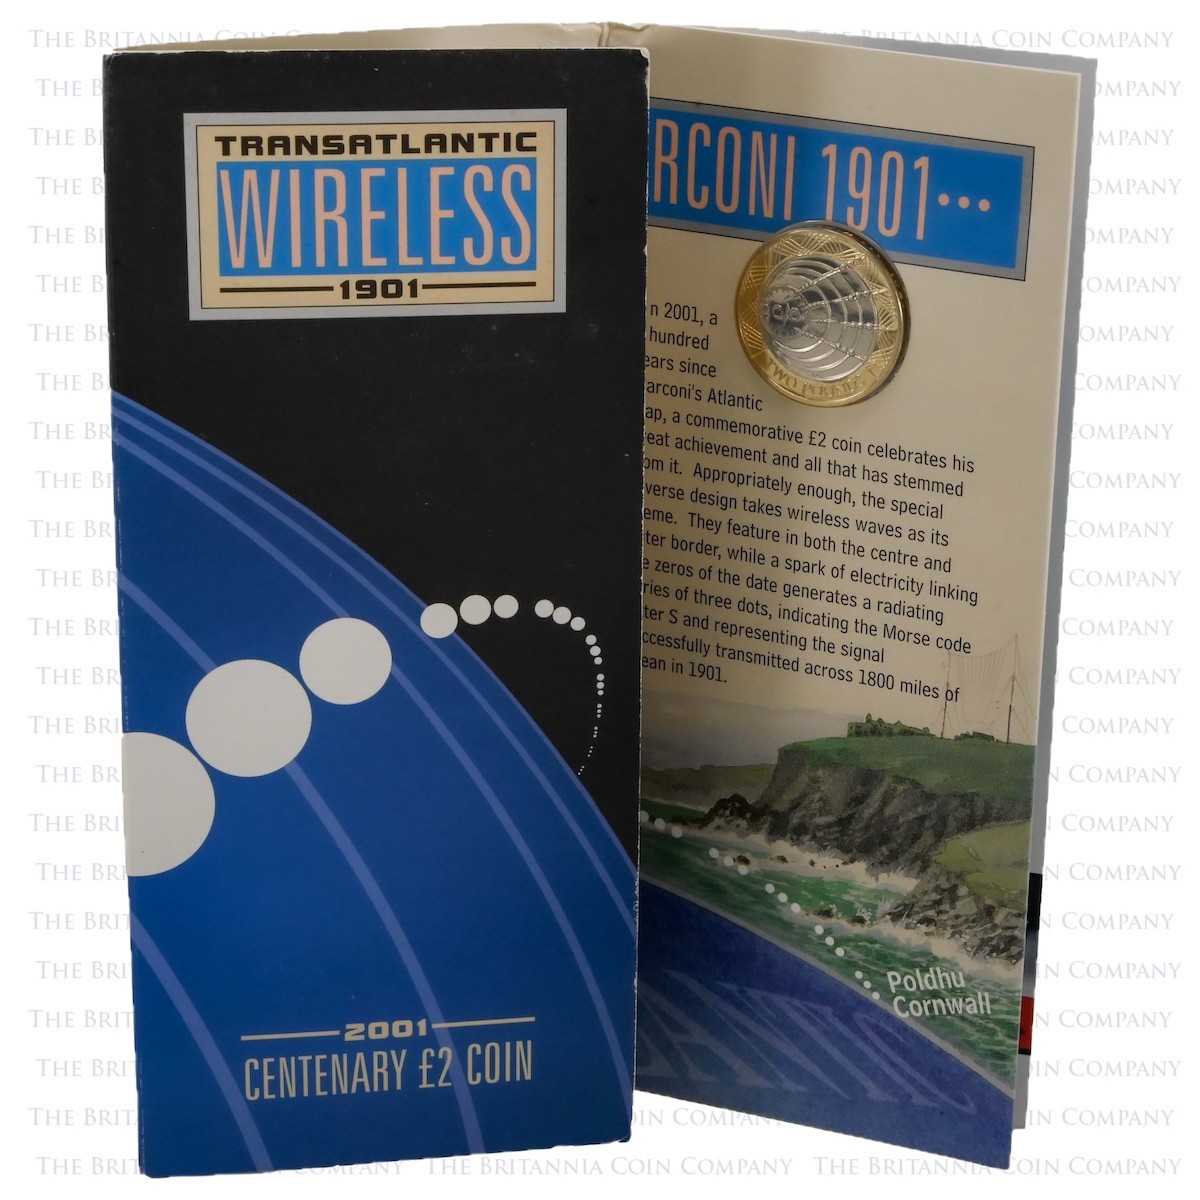 2001 Marconi First Wireless Transmission £2 Brilliant Uncirculated In Folder Packaging